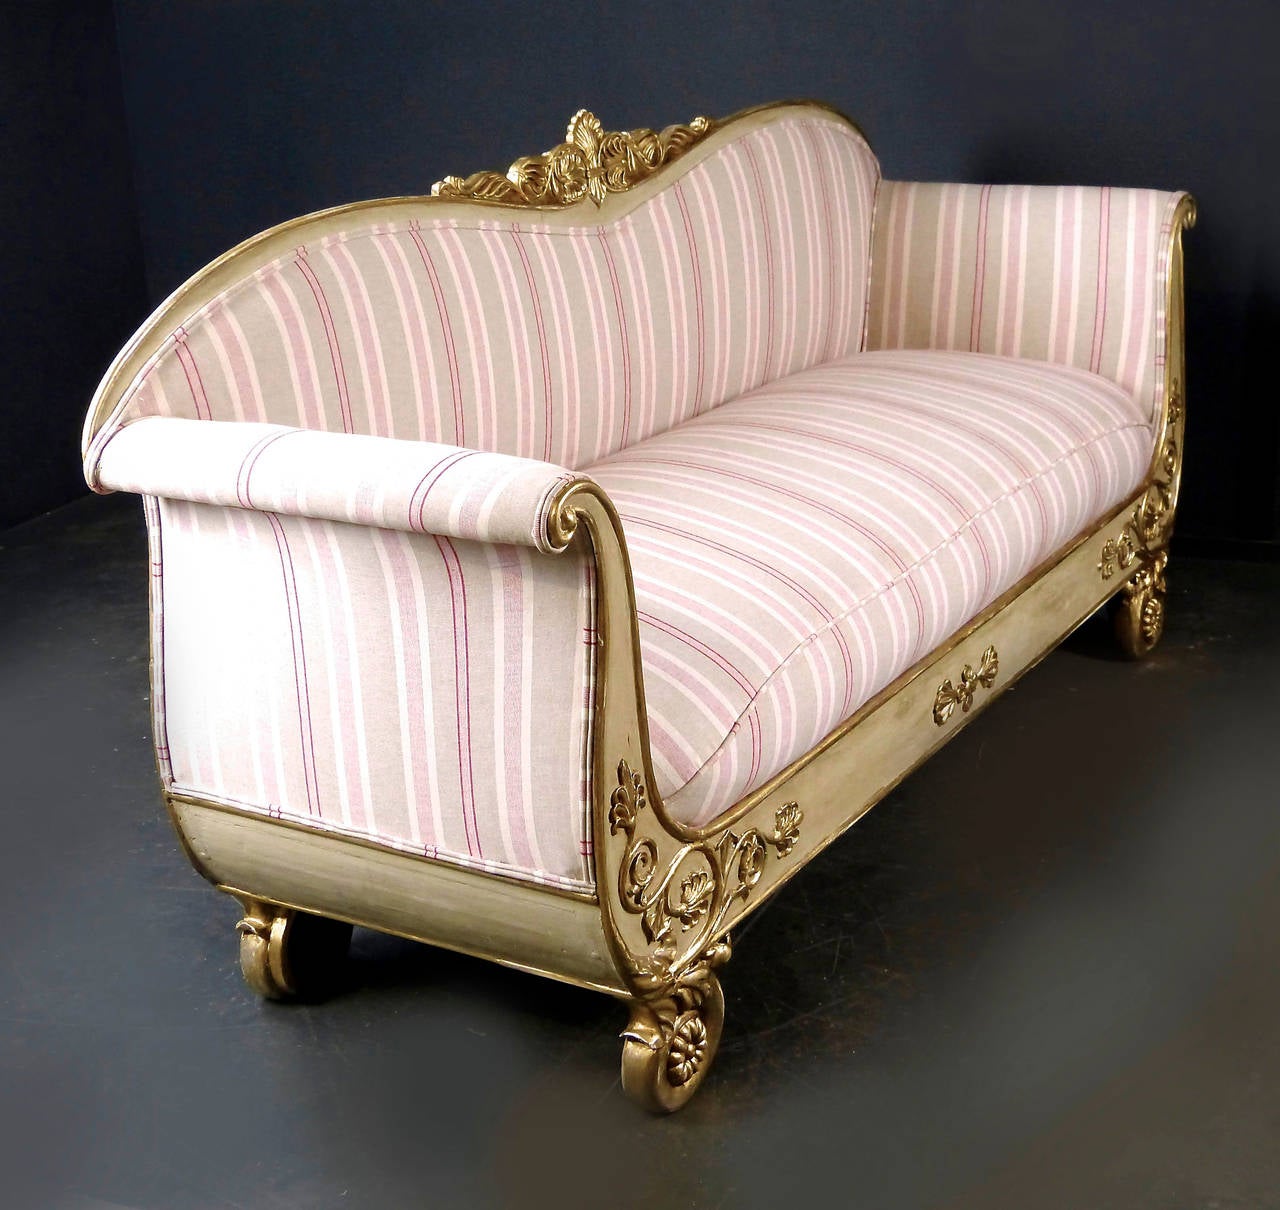 Mid-19th century painted and parcel-gilt sofa of Scandinavian origin, most probably Swedish, with graceful arches on back and sides supported by carved medallion shaped legs. The fine frame carvings are in relief and gilt, slightly time worn and